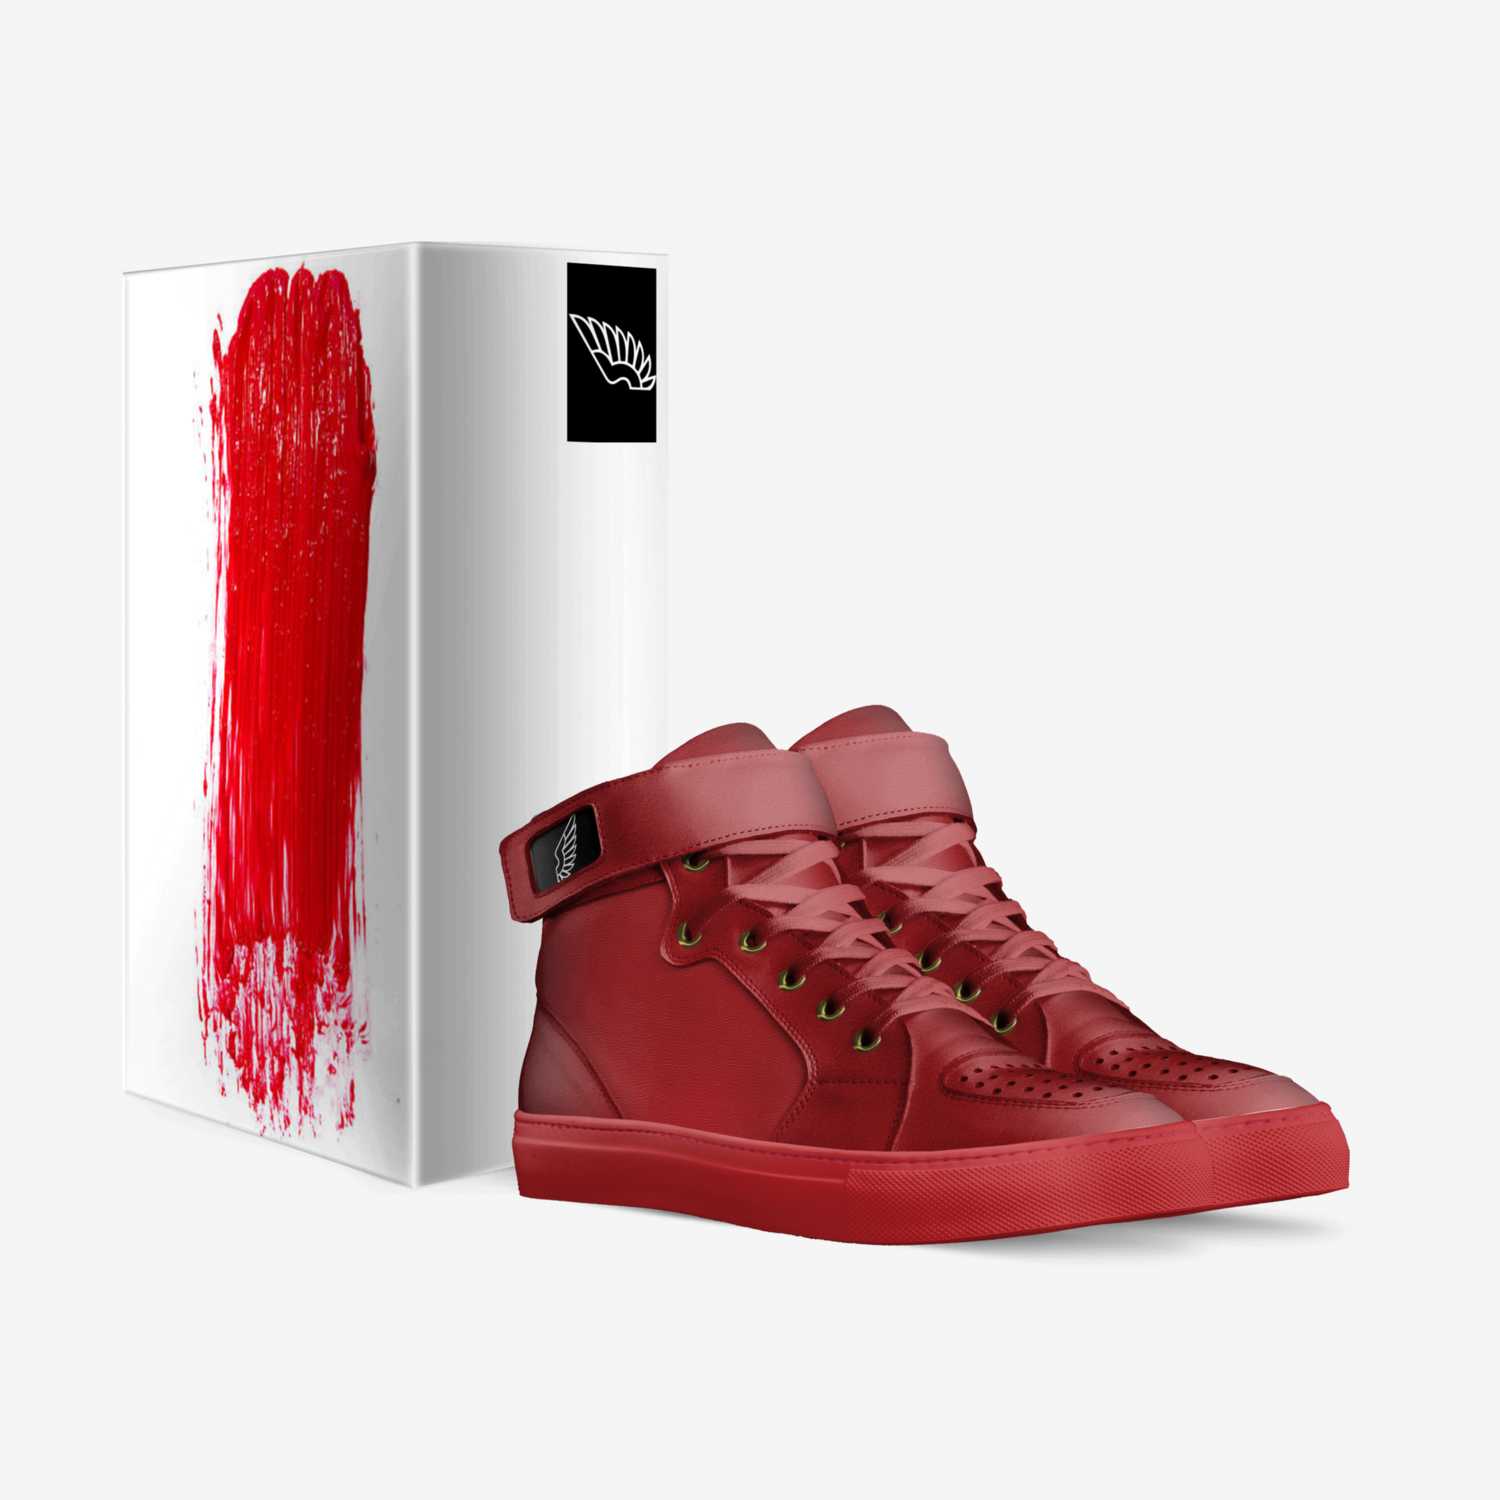 Red October custom made in Italy shoes by Richard Burgos | Box view